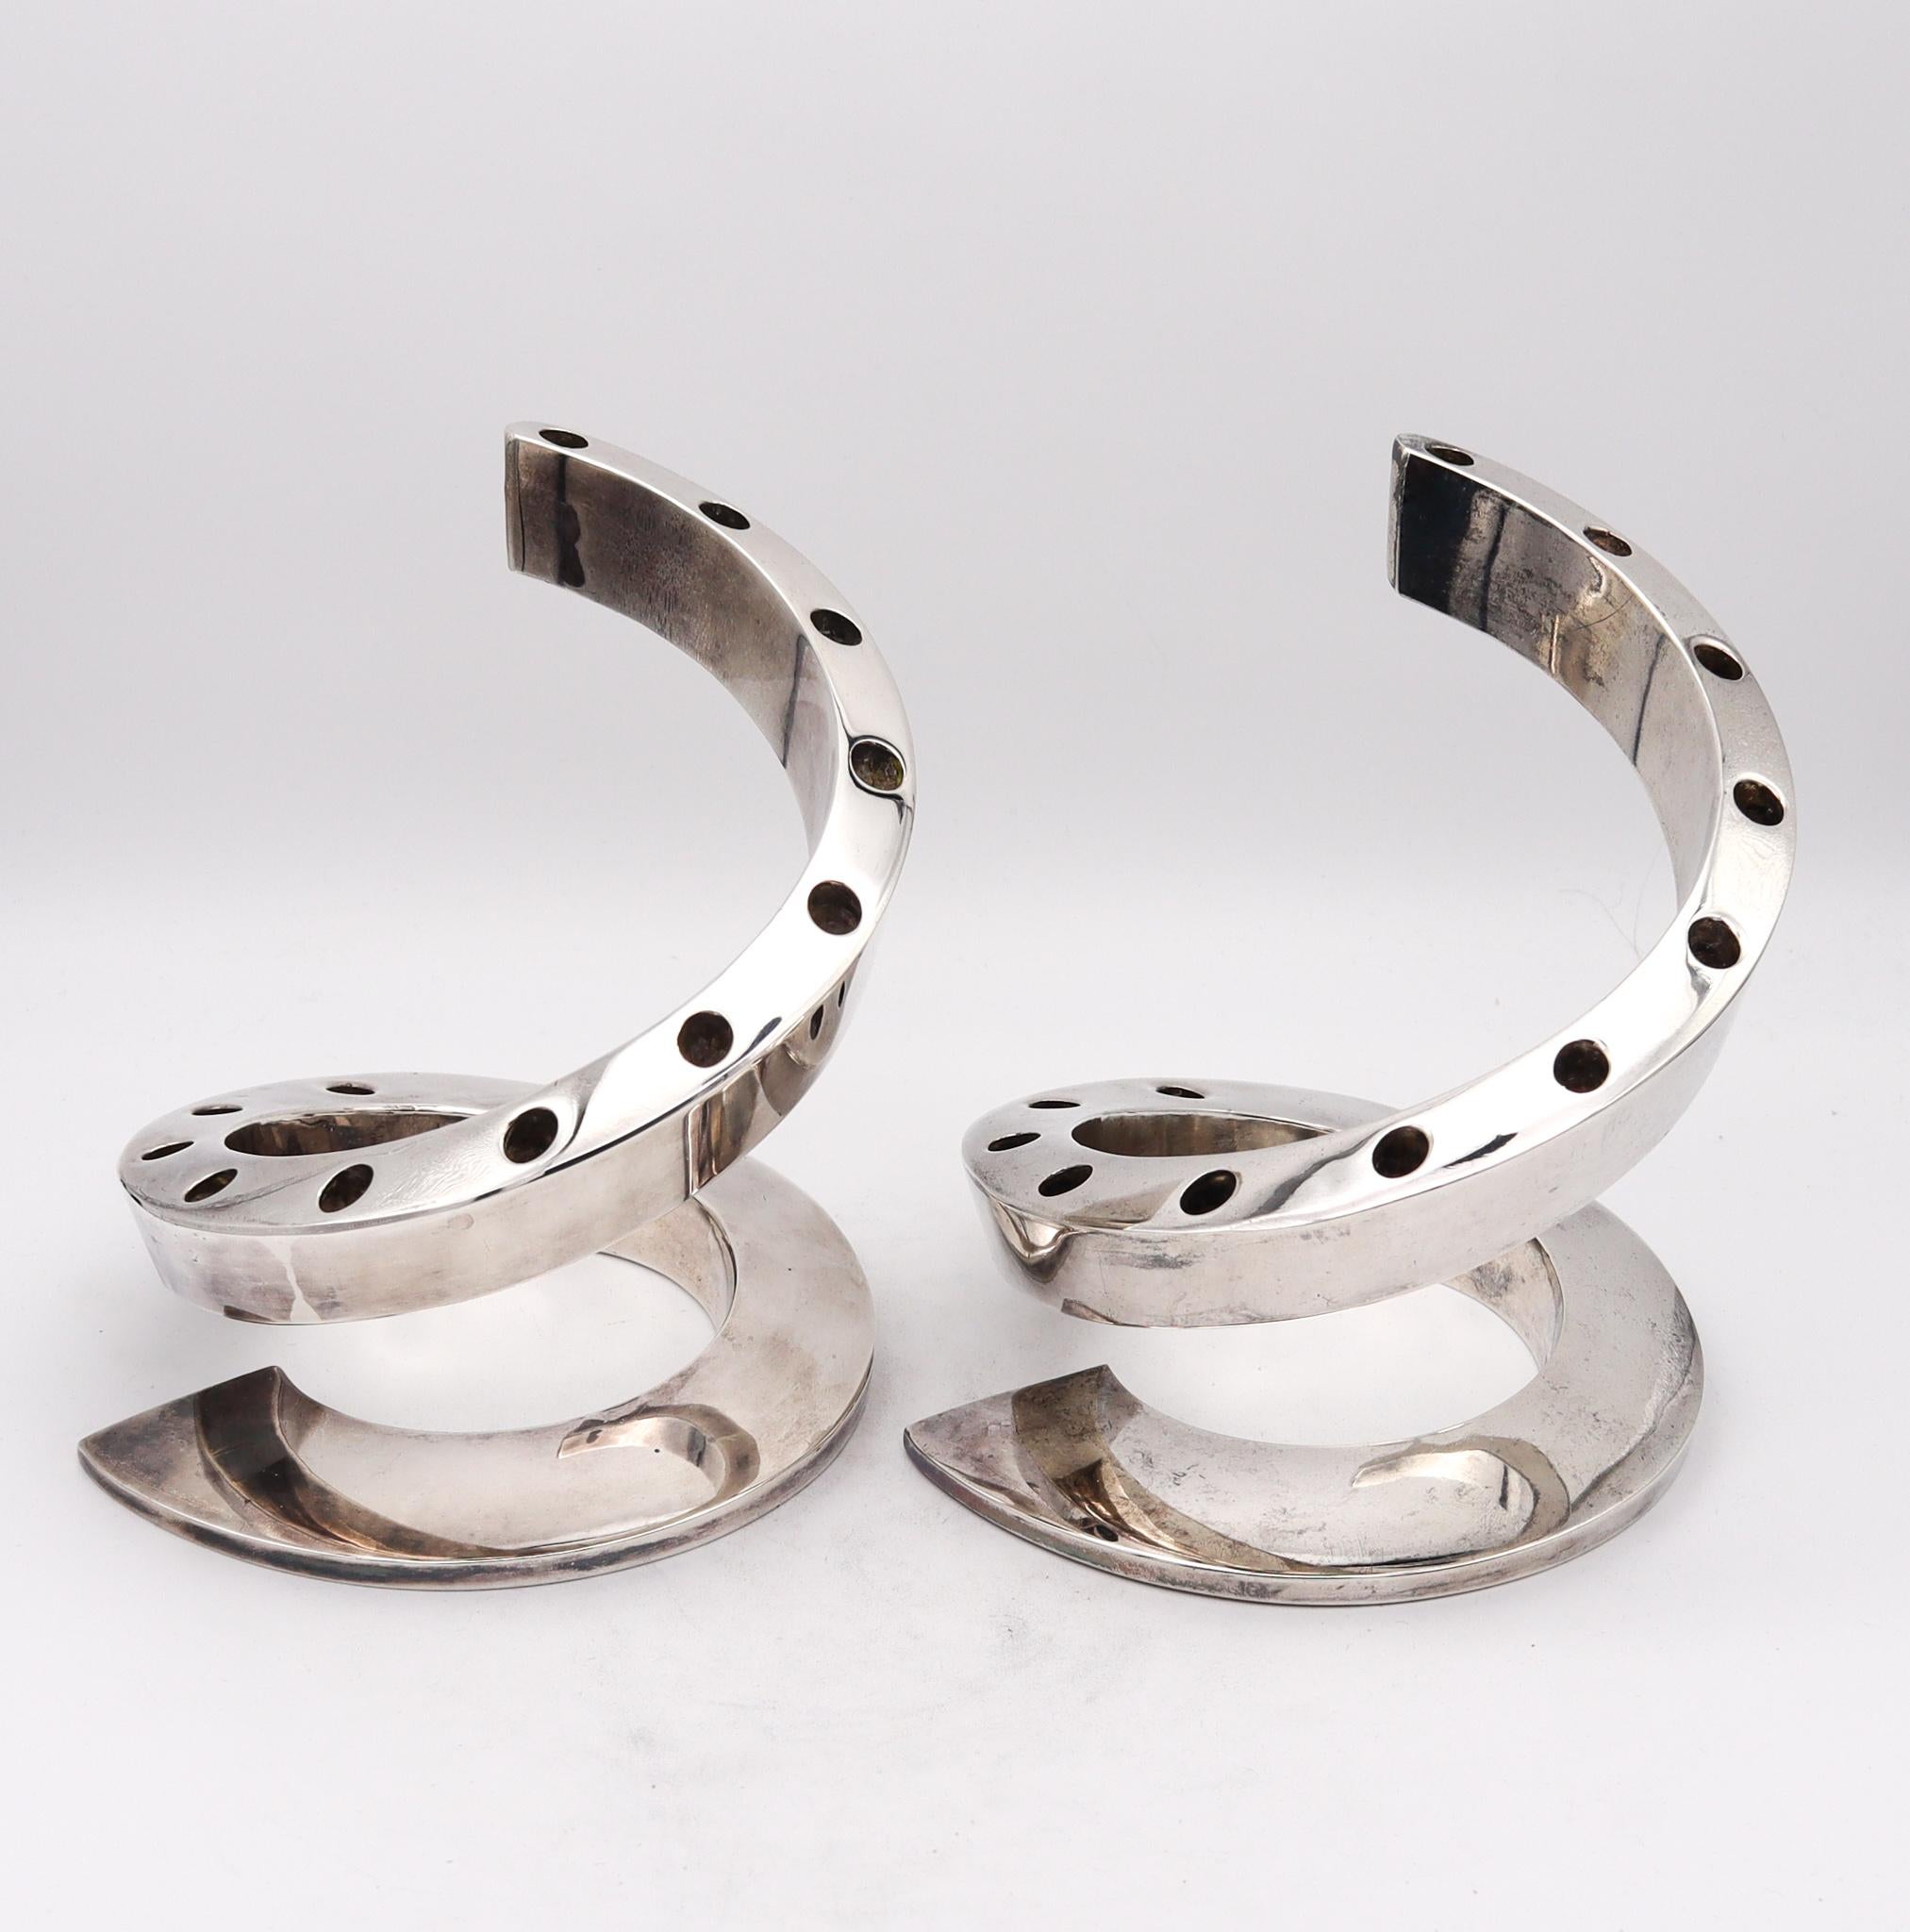 Pair of swirl candlestick designed by Bertil Vallien (1938-).

Beautiful pair of sculptural swirls candlesticks, created in Sweden by Bertil Vallien, back in the 1970's. These pair has been crafted by the Danks design company in solid